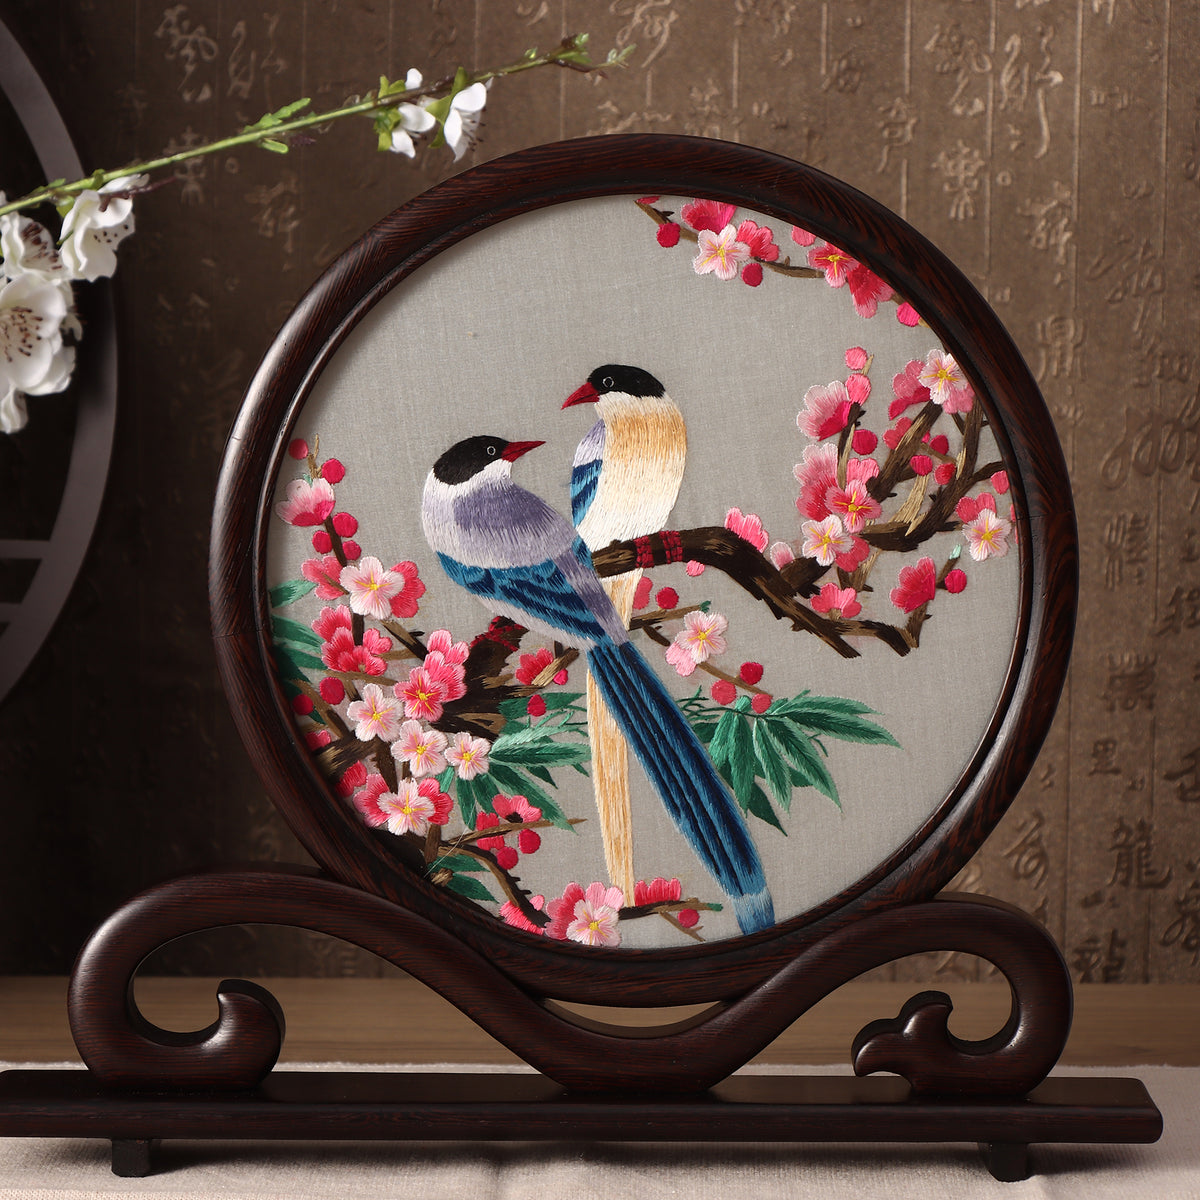 Hunan Embroidery with Stand 【 Plum and Magpies】 Ruyiframe-For Home Decoration